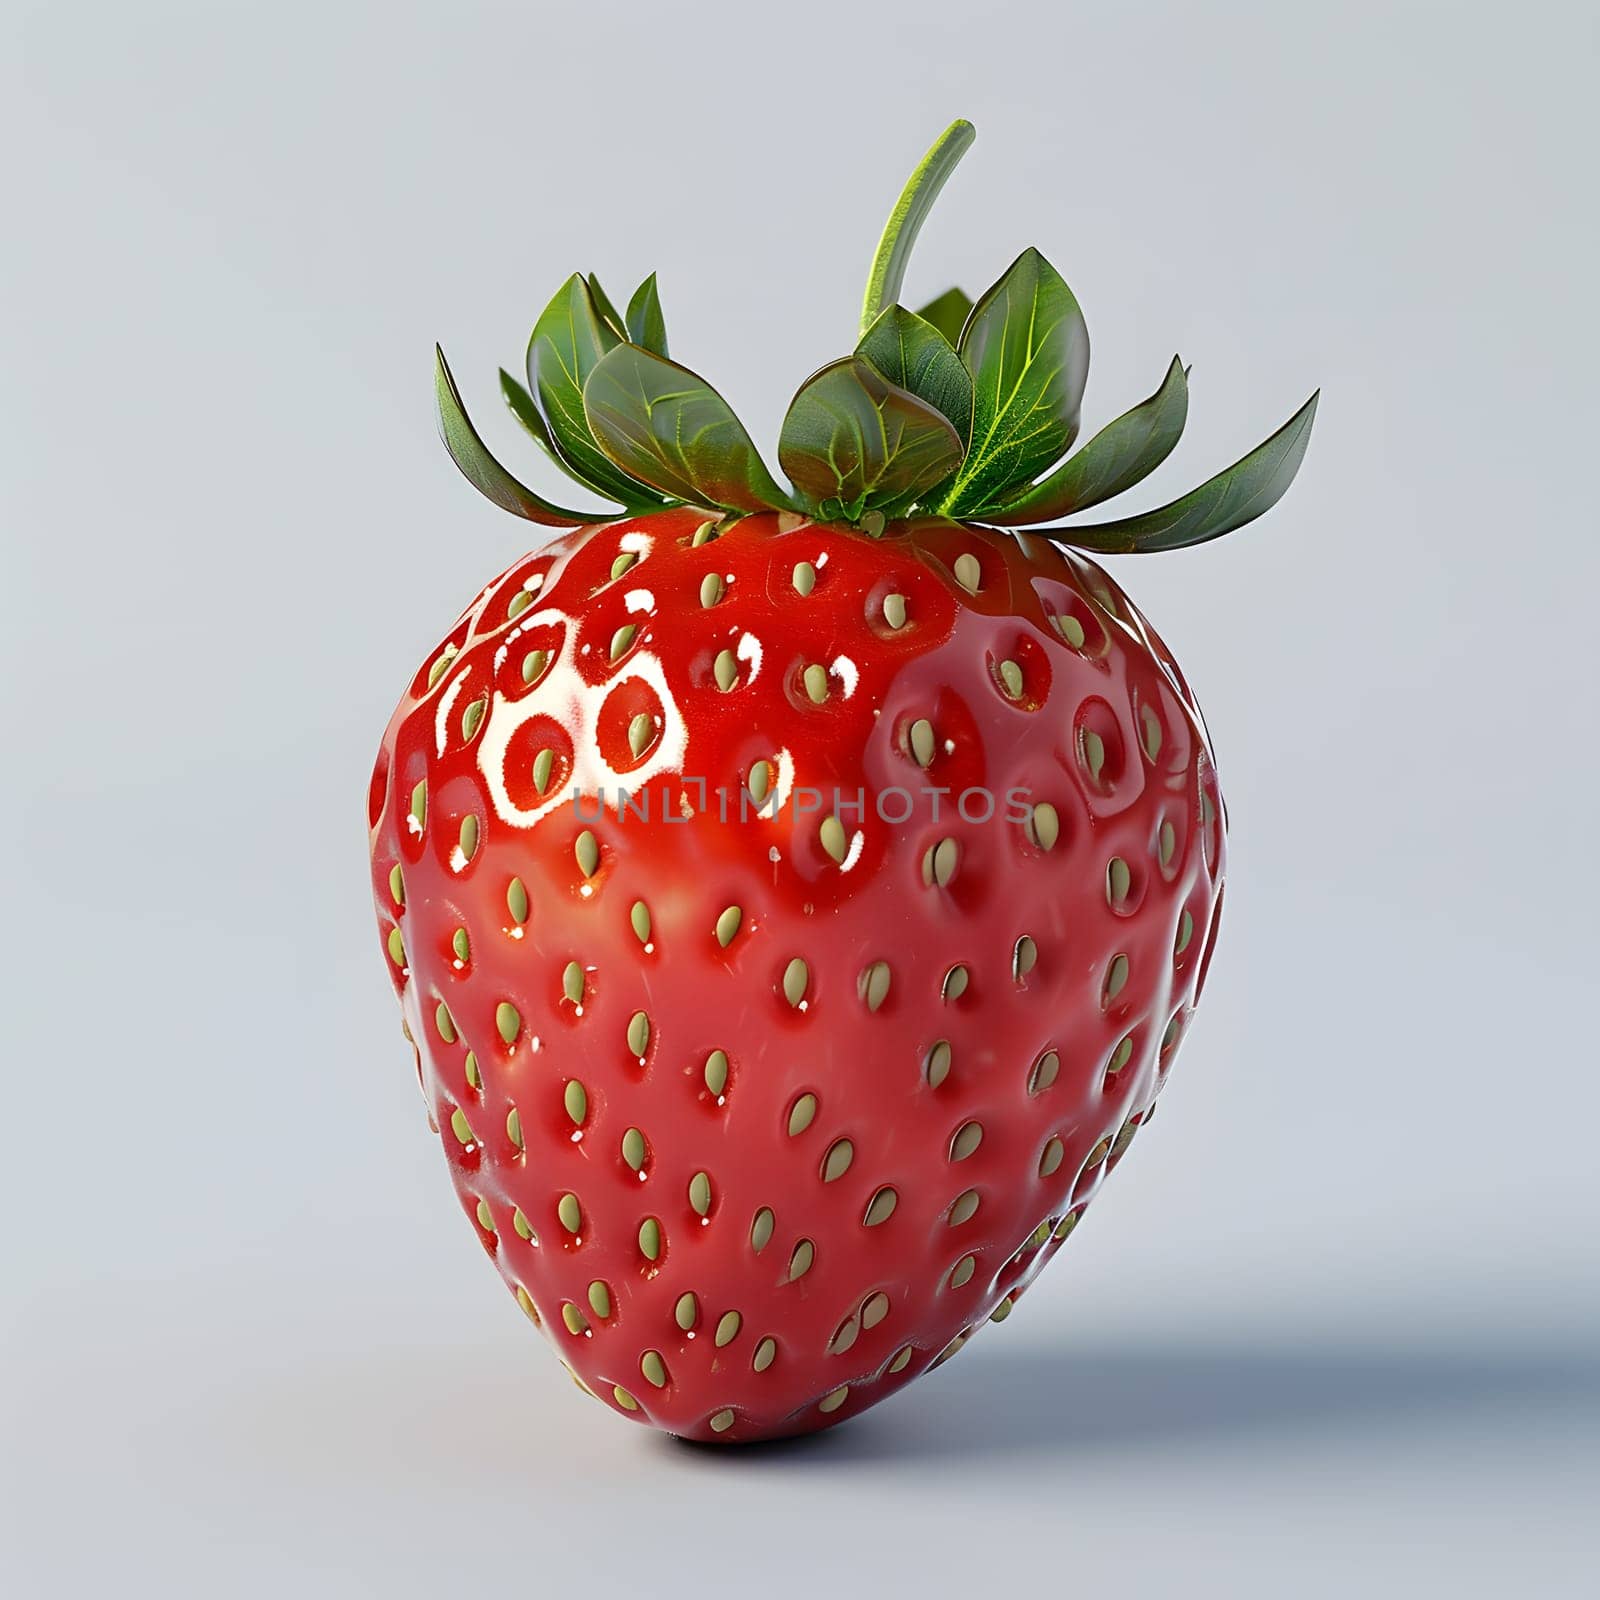 A red strawberry with green leaves, a staple food that is both a fruit and a berry, seedless and natural foods, on a white background in a rectangle shape